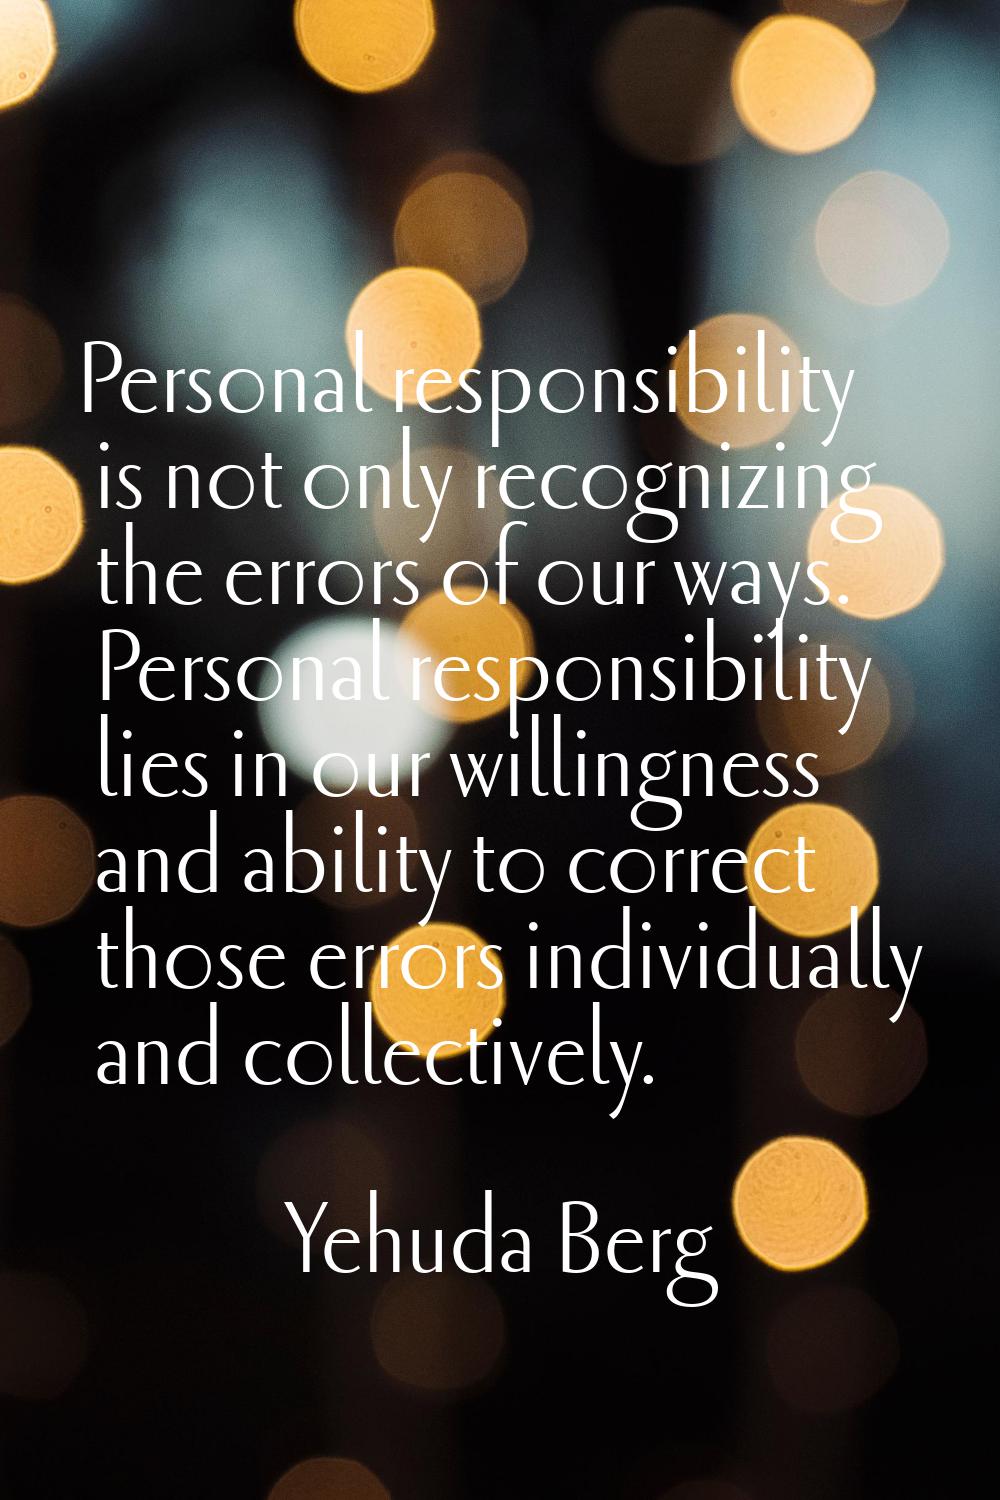 Personal responsibility is not only recognizing the errors of our ways. Personal responsibility lie